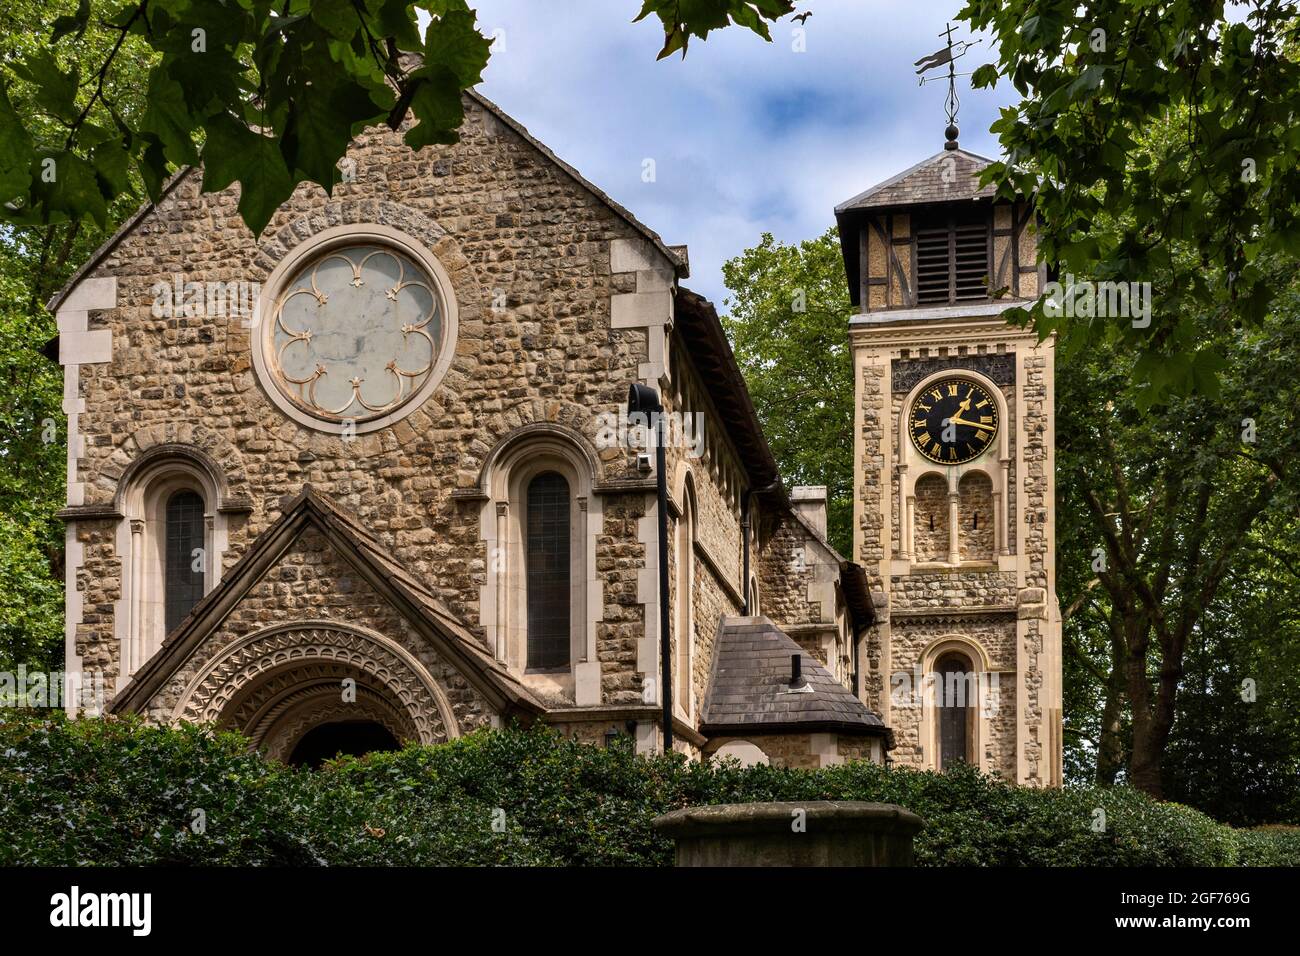 LONDON SOMERS TOWN SAINT PANCRAS OLD CHURCH THE BUILDING AND CLOCK TOWER Stock Photo